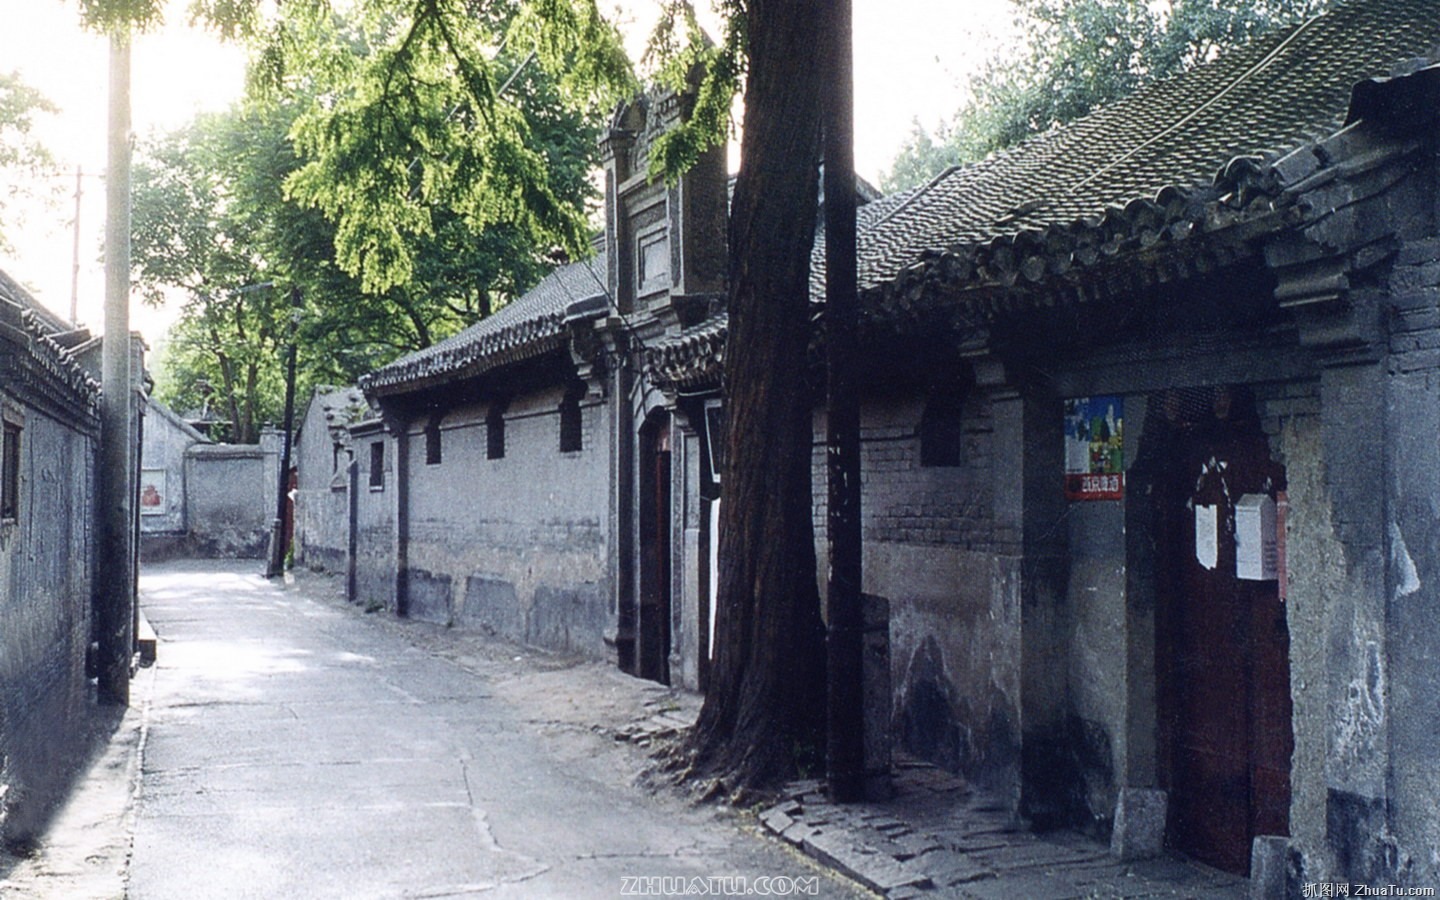 Old Hutong life for old photos wallpaper #38 - 1440x900